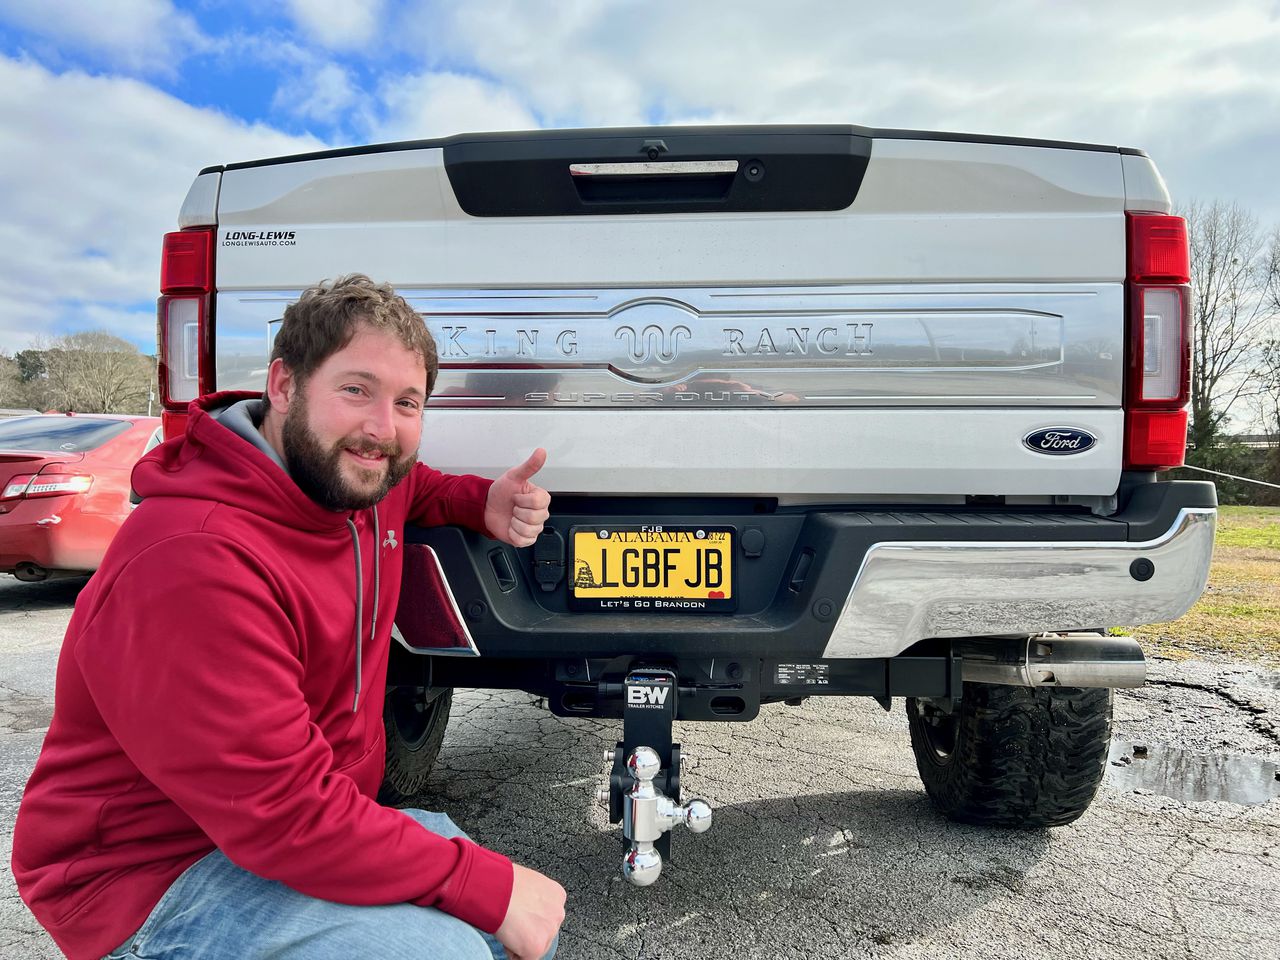 Nathan Kirk in front of his license plate